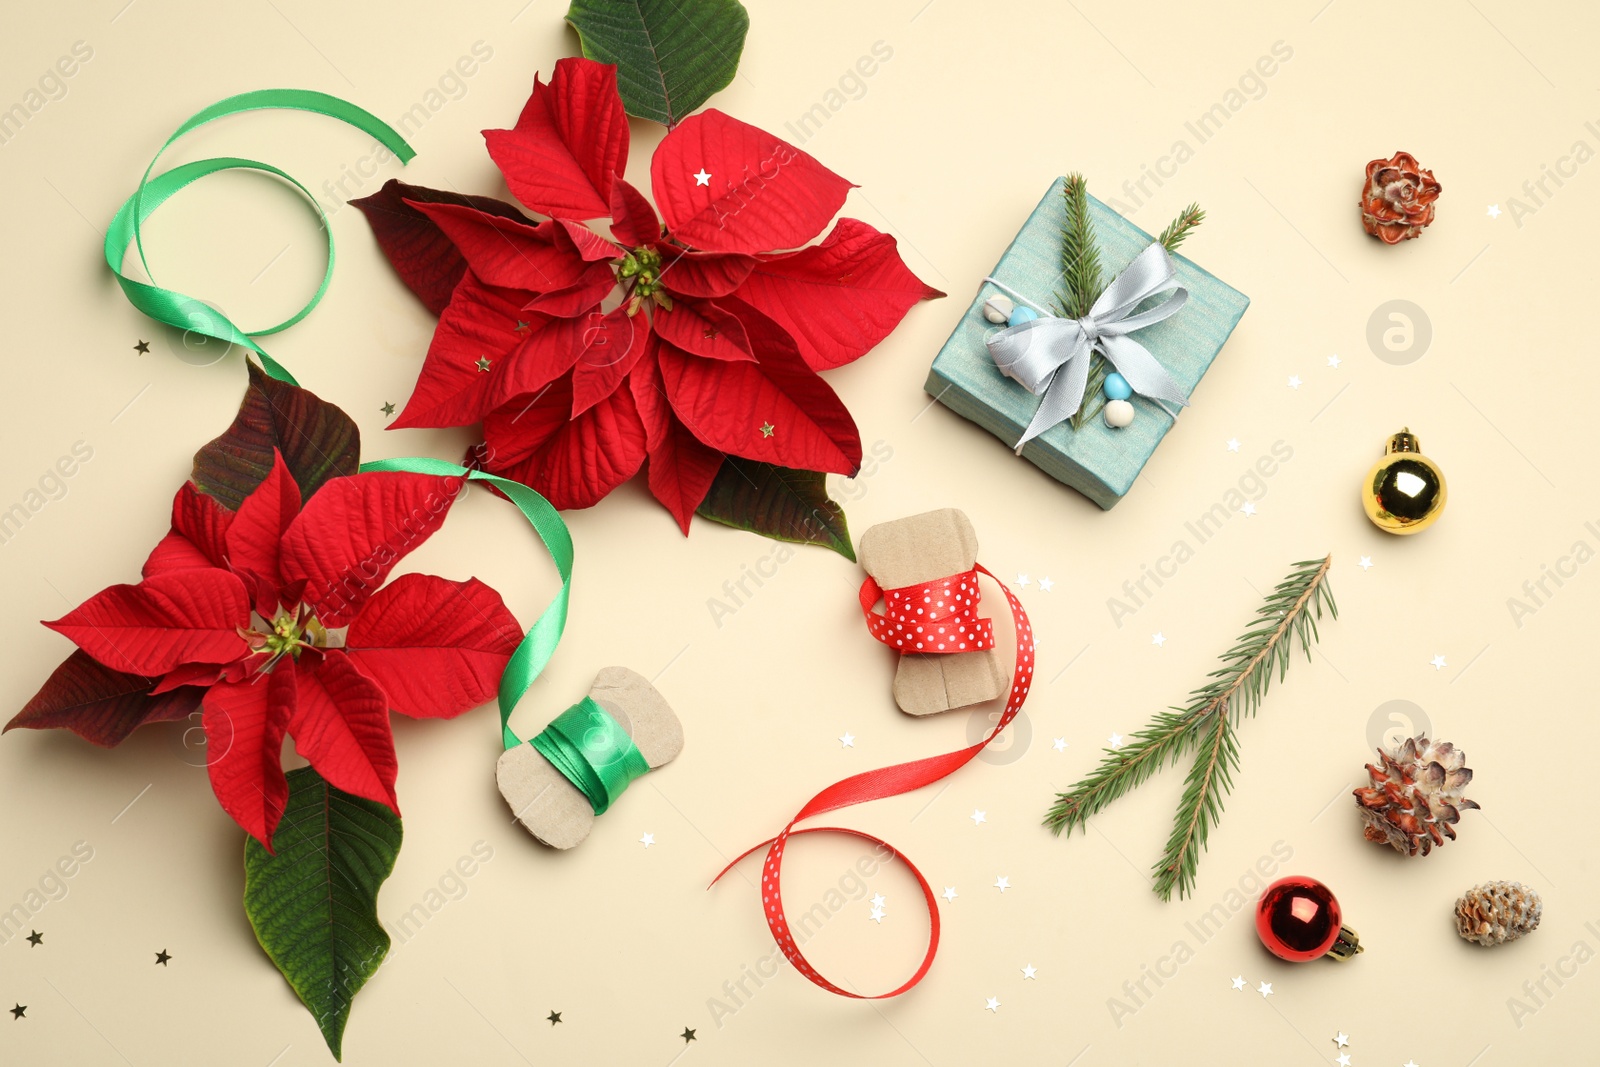 Photo of Flat lay composition with poinsettias (traditional Christmas flowers) and holiday decor on beige background